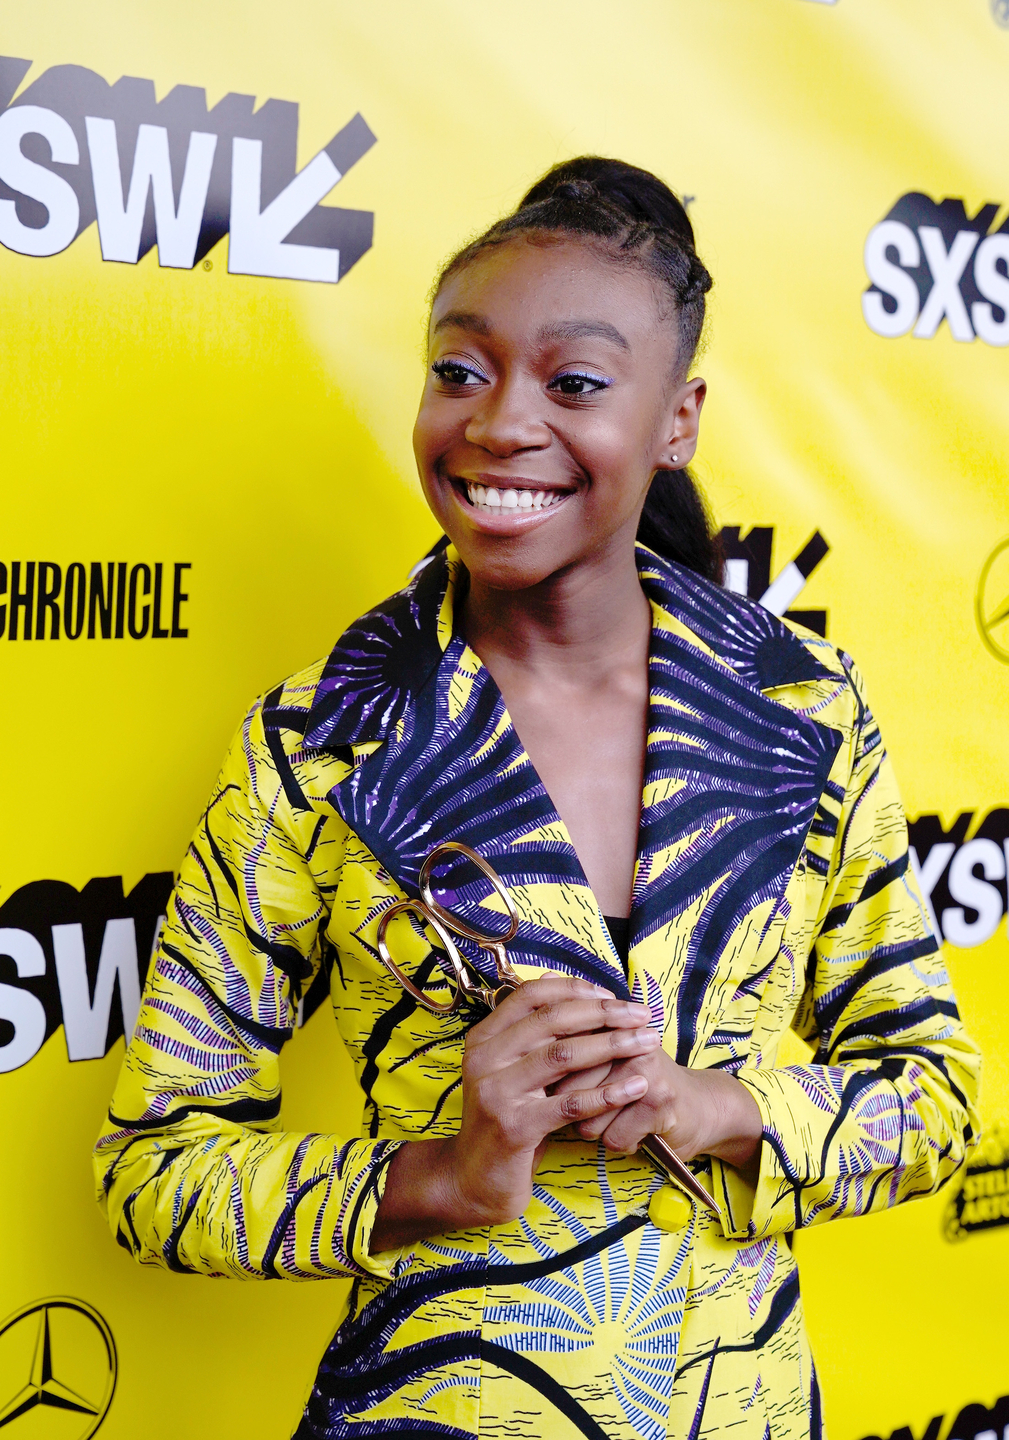 Shahadi Wright Joseph at the Us World Premiere – Photo by Ismael Quintanilla/Getty Images for SXSW